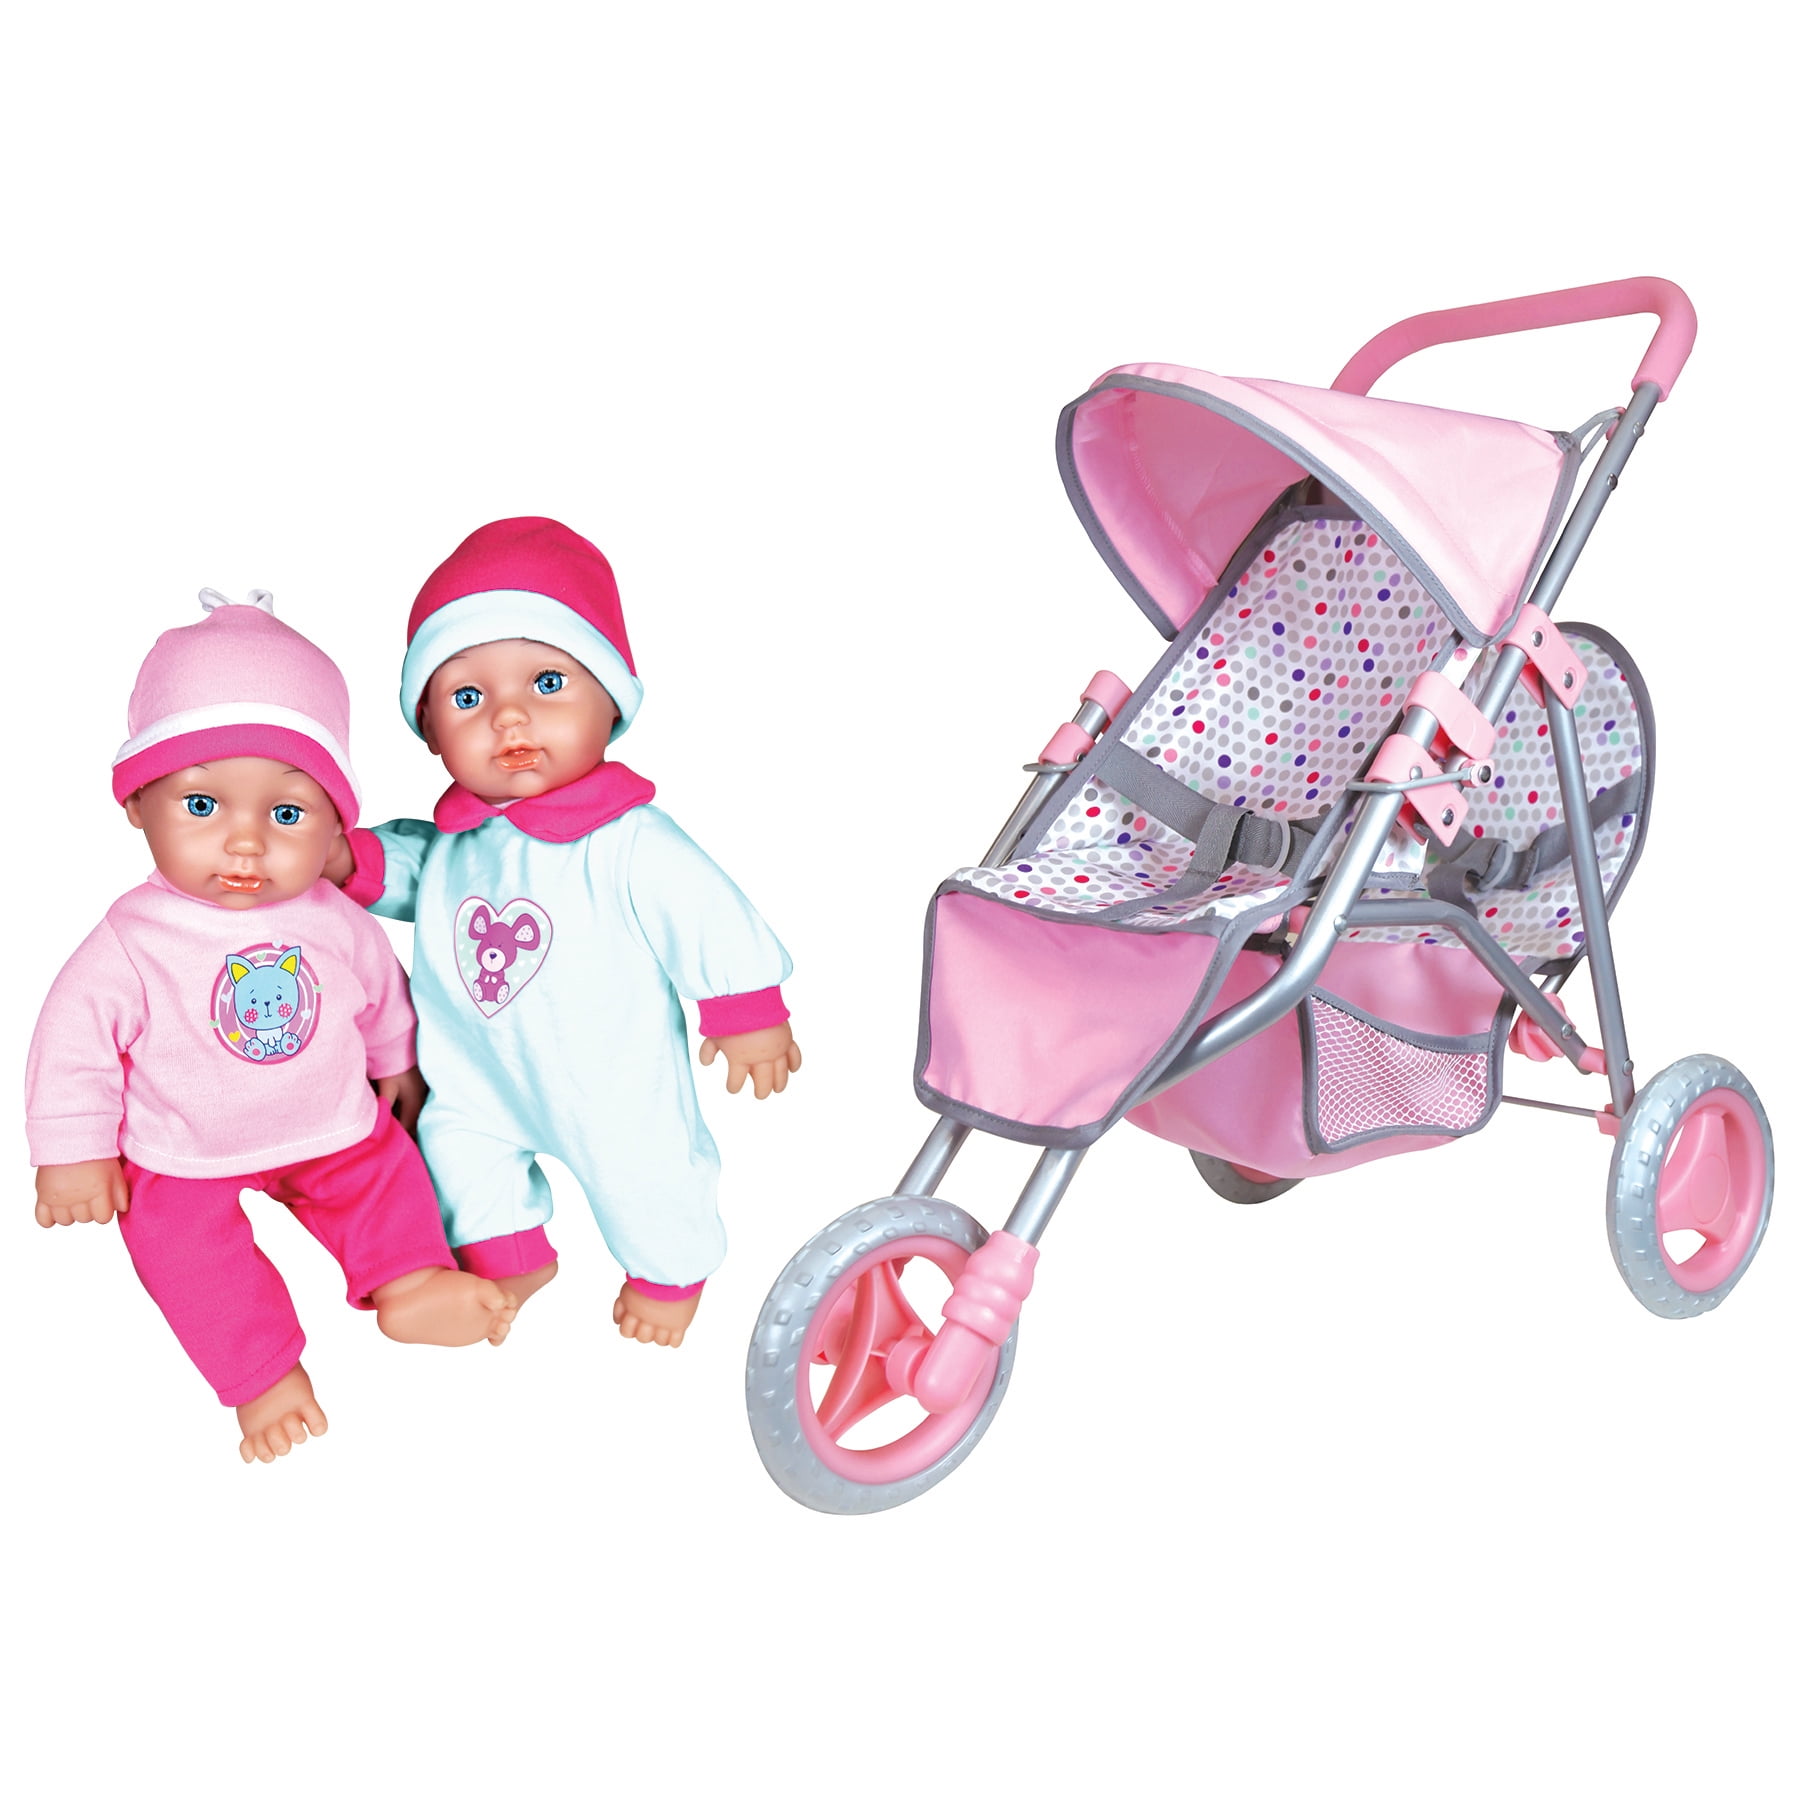 new Perfectly Cute Baby Doll Double Jogger Stroller New 18" dolls fit 2 